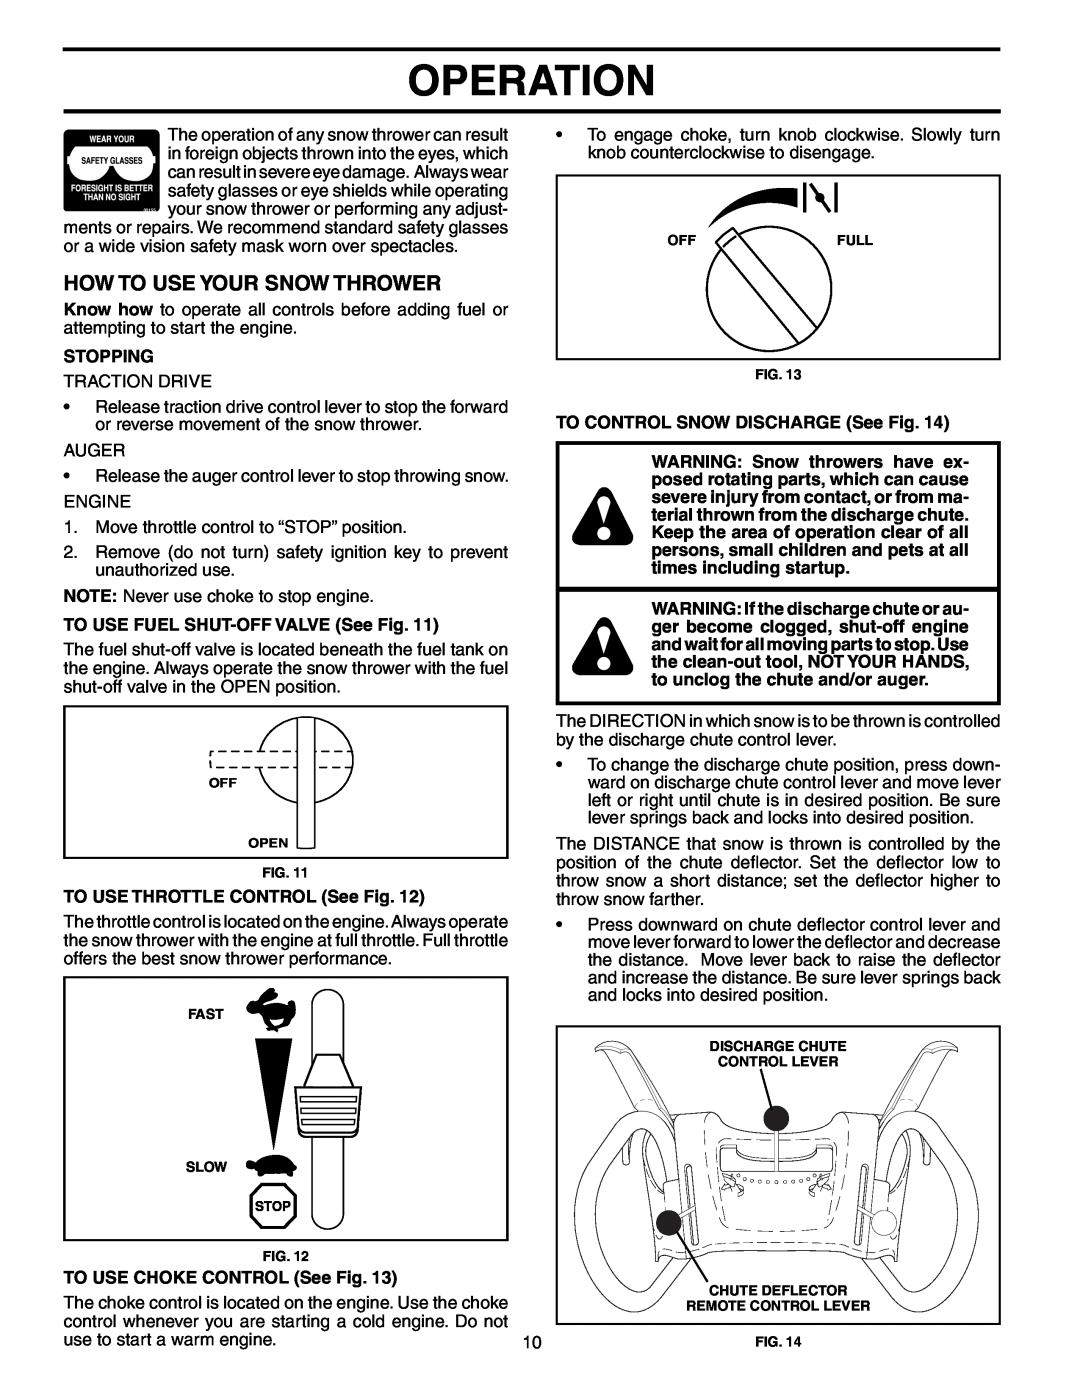 Poulan PR10527ESA owner manual How To Use Your Snow Thrower, Operation, Stopping, TO USE FUEL SHUT-OFF VALVE See Fig 